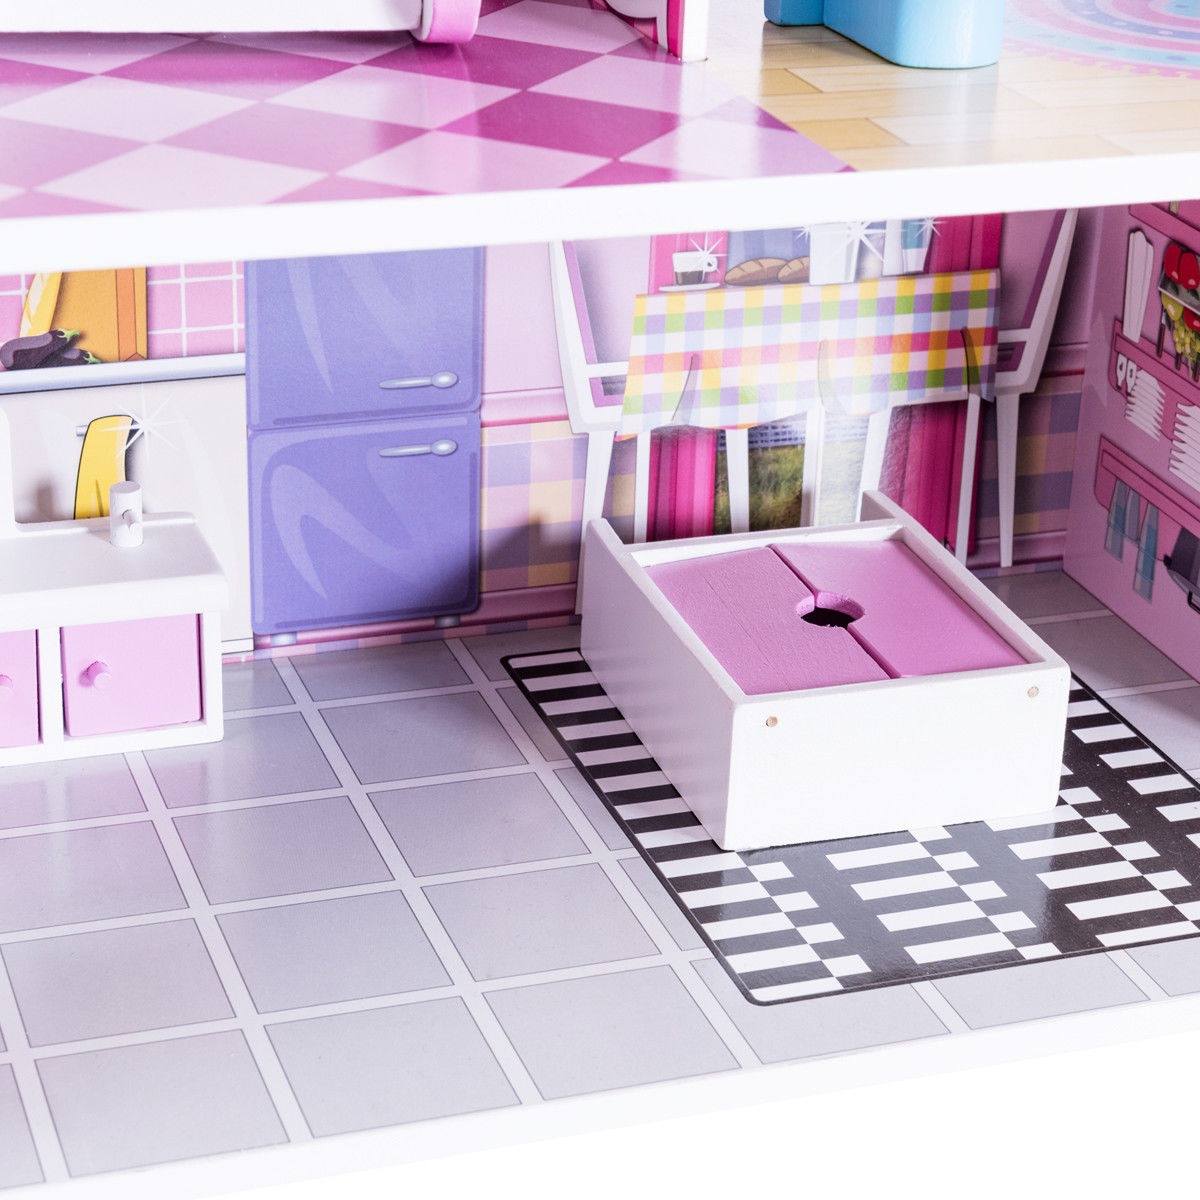 Details about   28" Pink Dollhouse w/ Furniture Gliding Elevator Rooms 3 Levels Young Girls Toy 